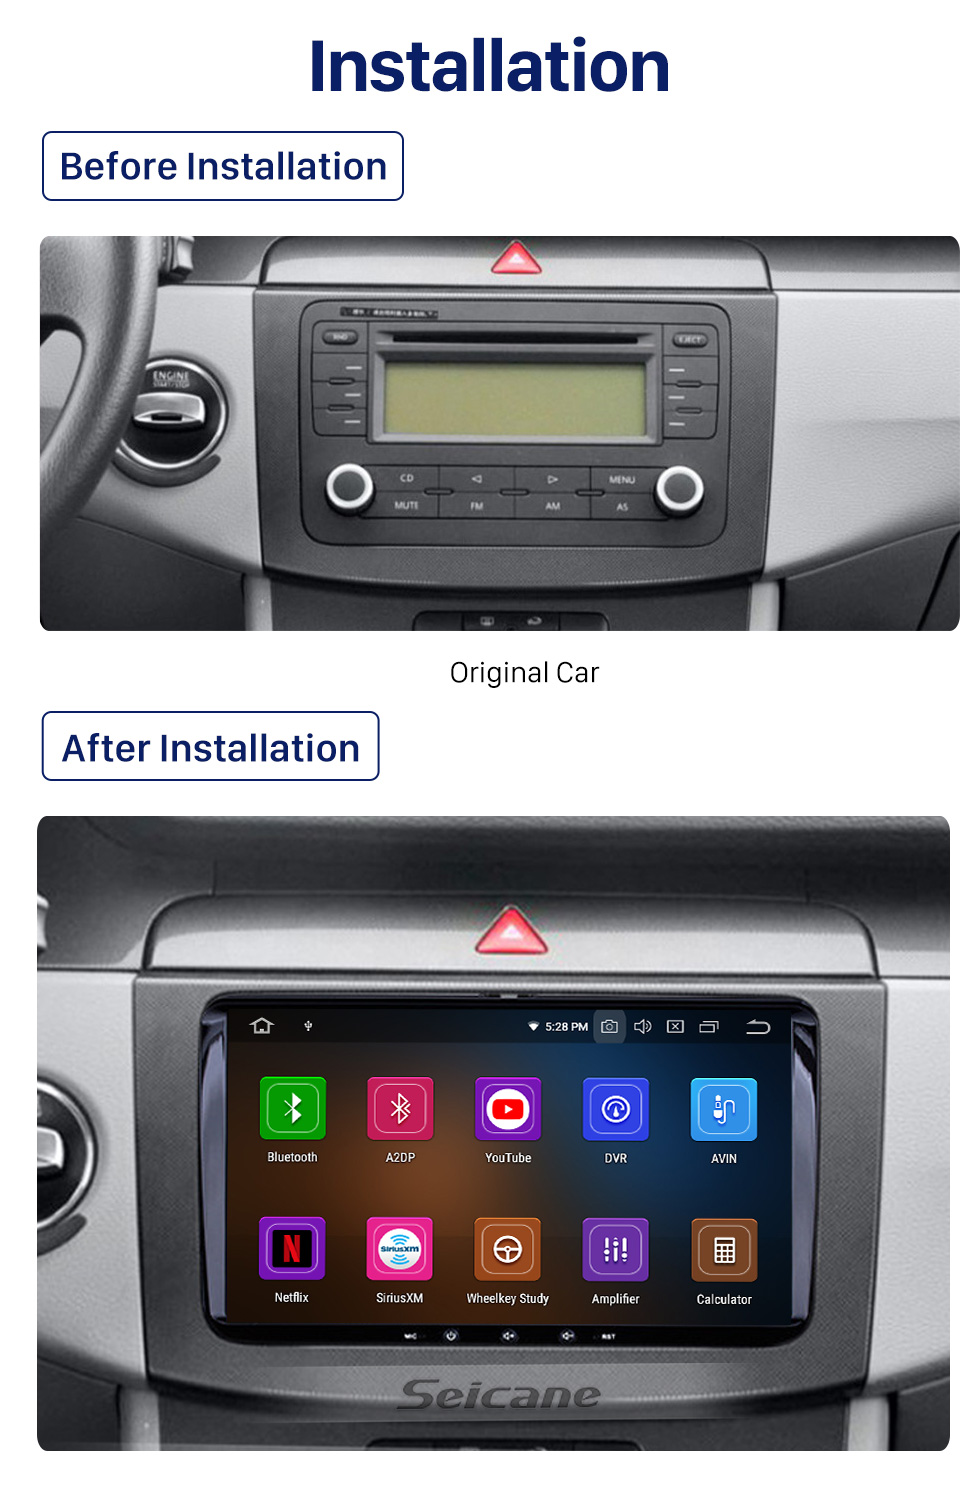 Seicane VW Volkswagen Universal SKODA Seat Android 10.0 GPS Navigation Car DVD Player with 3G WiFi Mirror Link Backup Camera OBD2 DVR HD touch Screen Steering wheel control Bluetooth